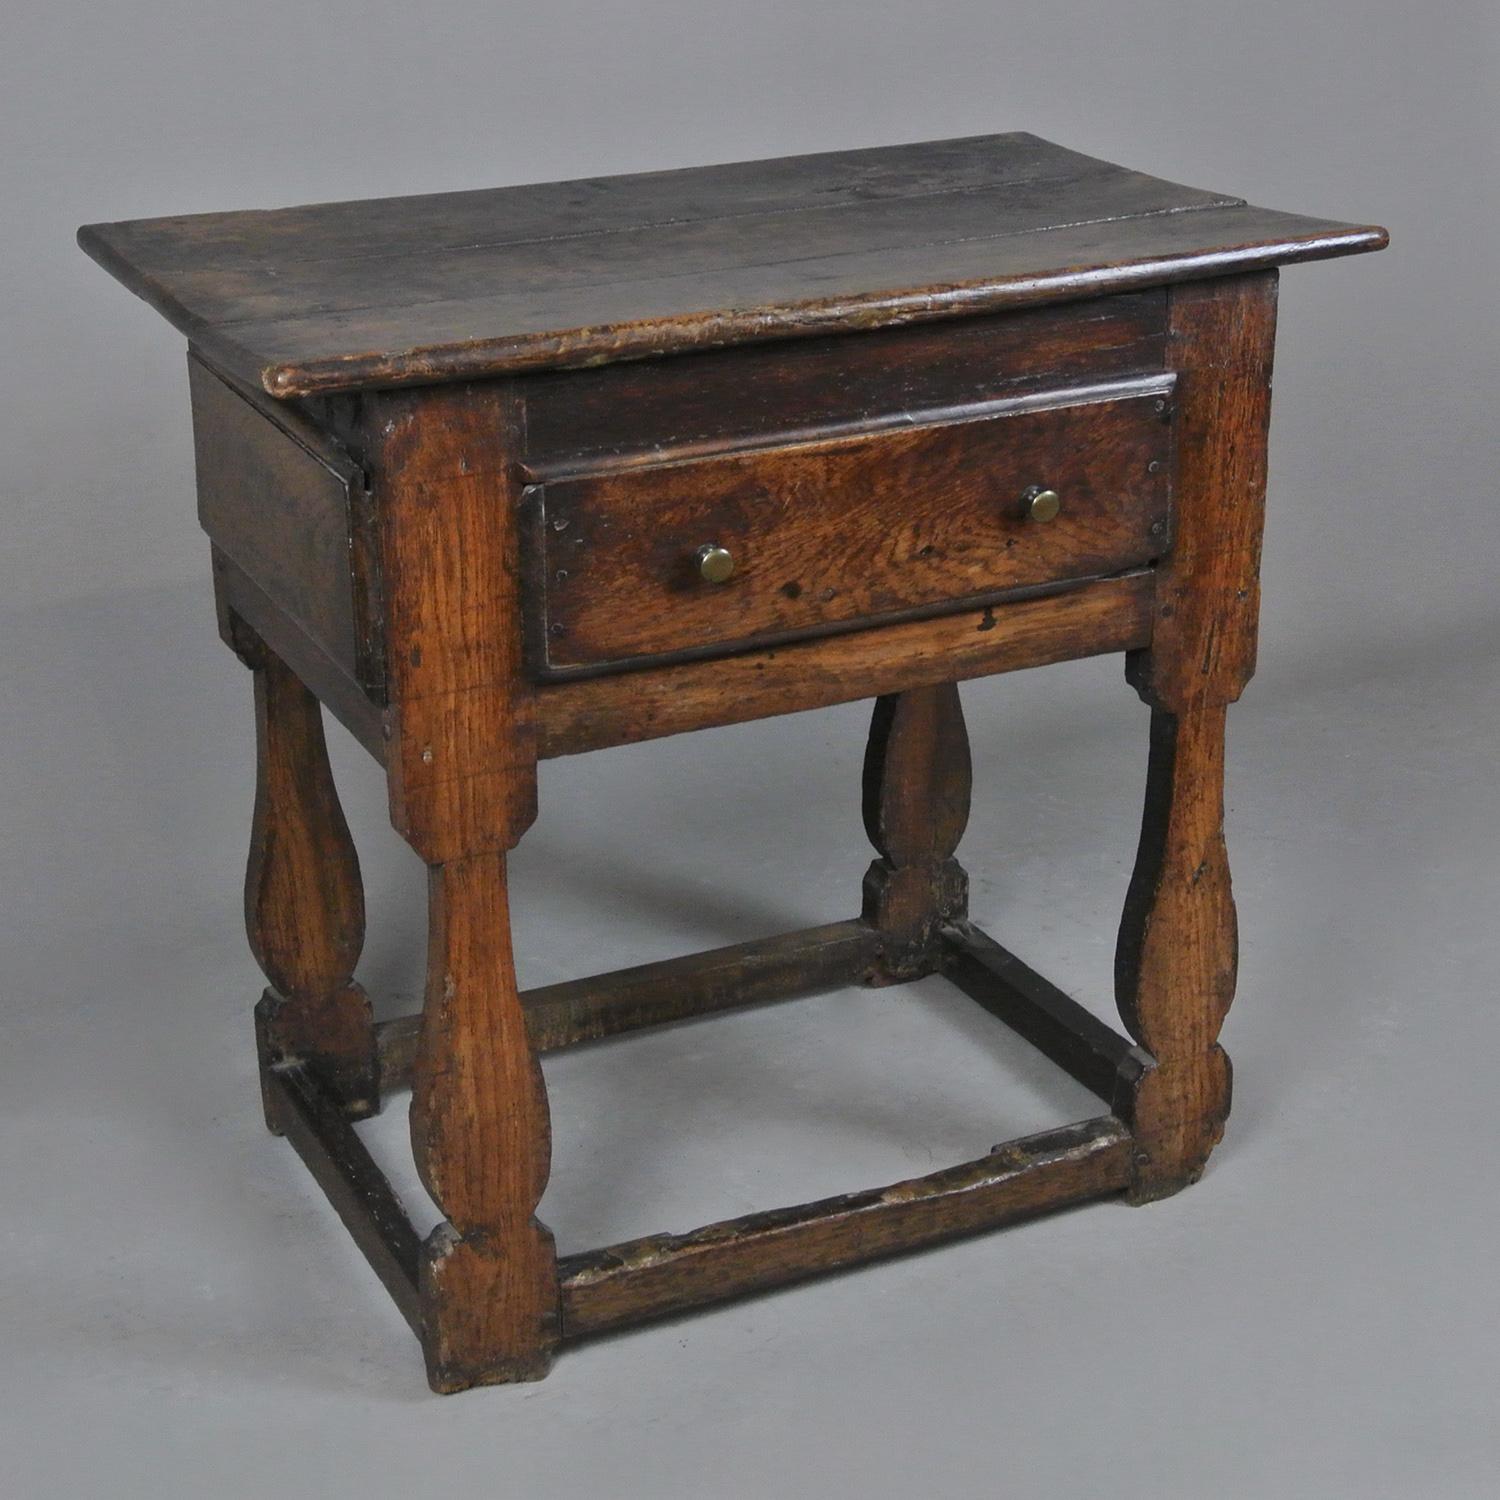 18th Century and Earlier Small 17th Century Oak and Elm Tavern Table c. 1620